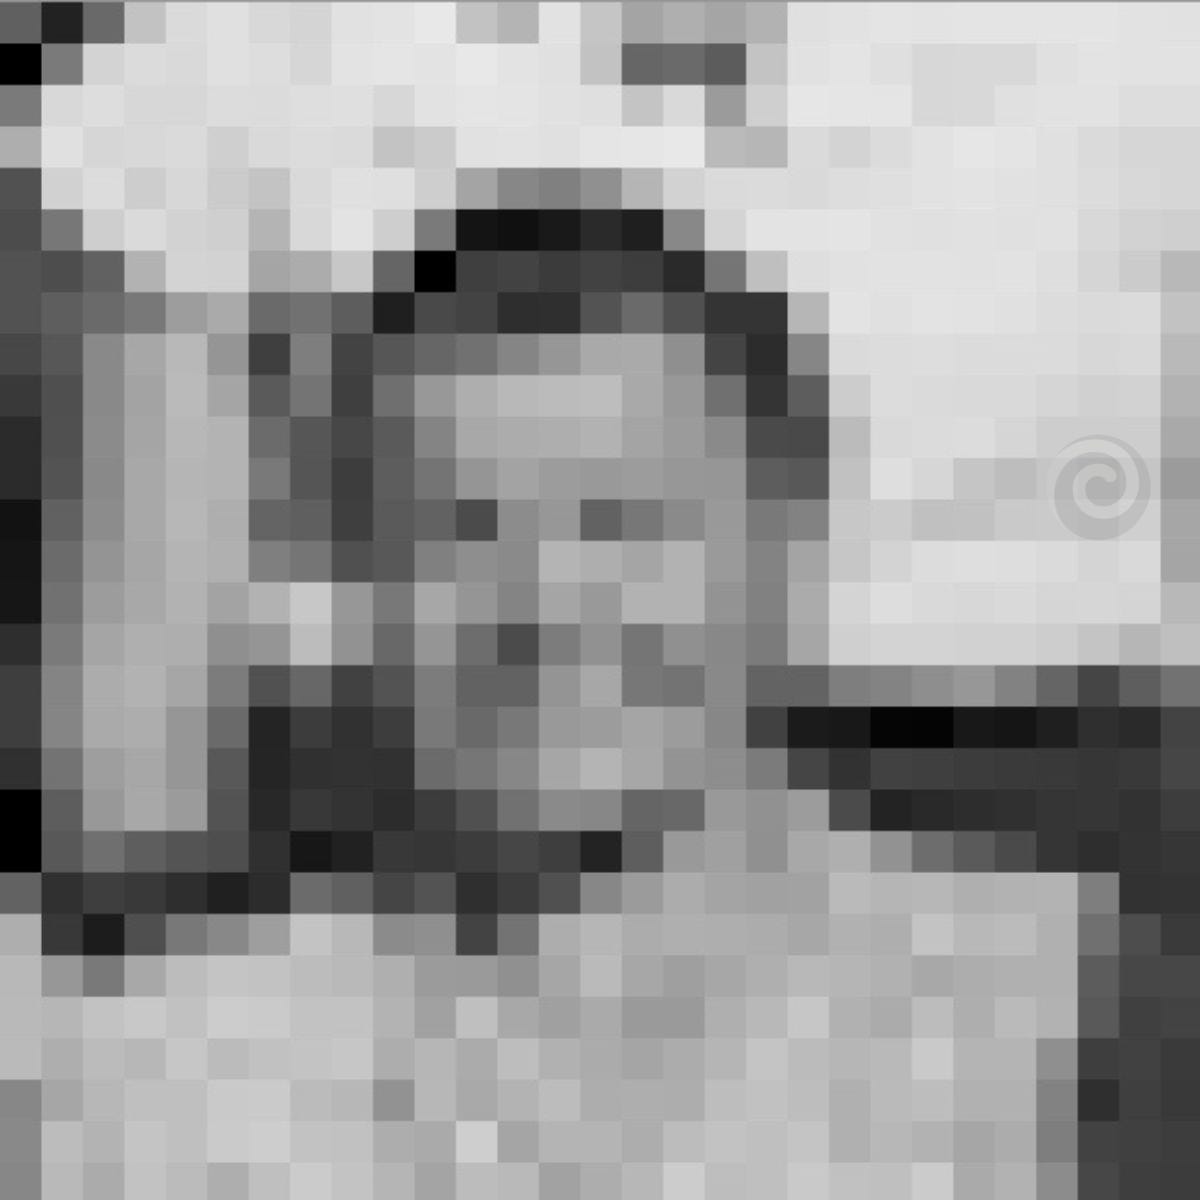 The pixelated picture of a woman's face